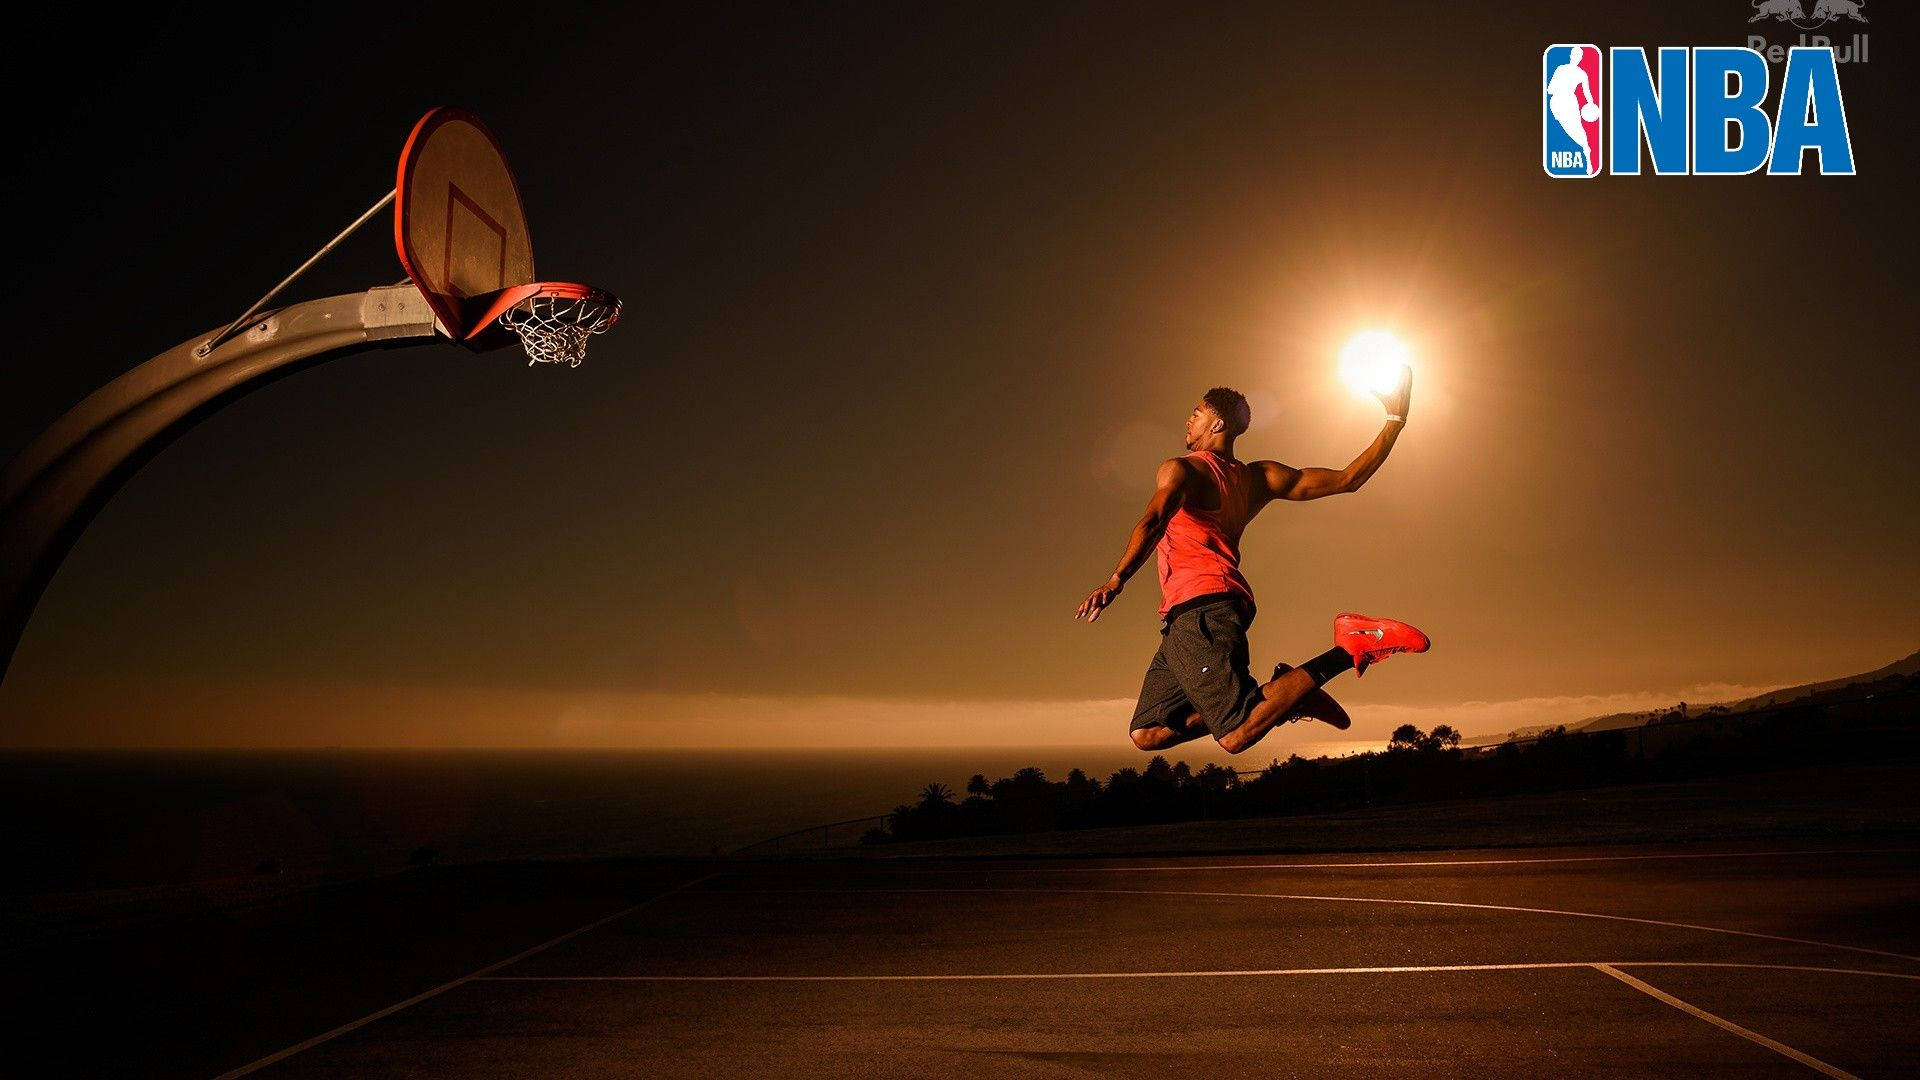 Hd Basketball With Sun Background